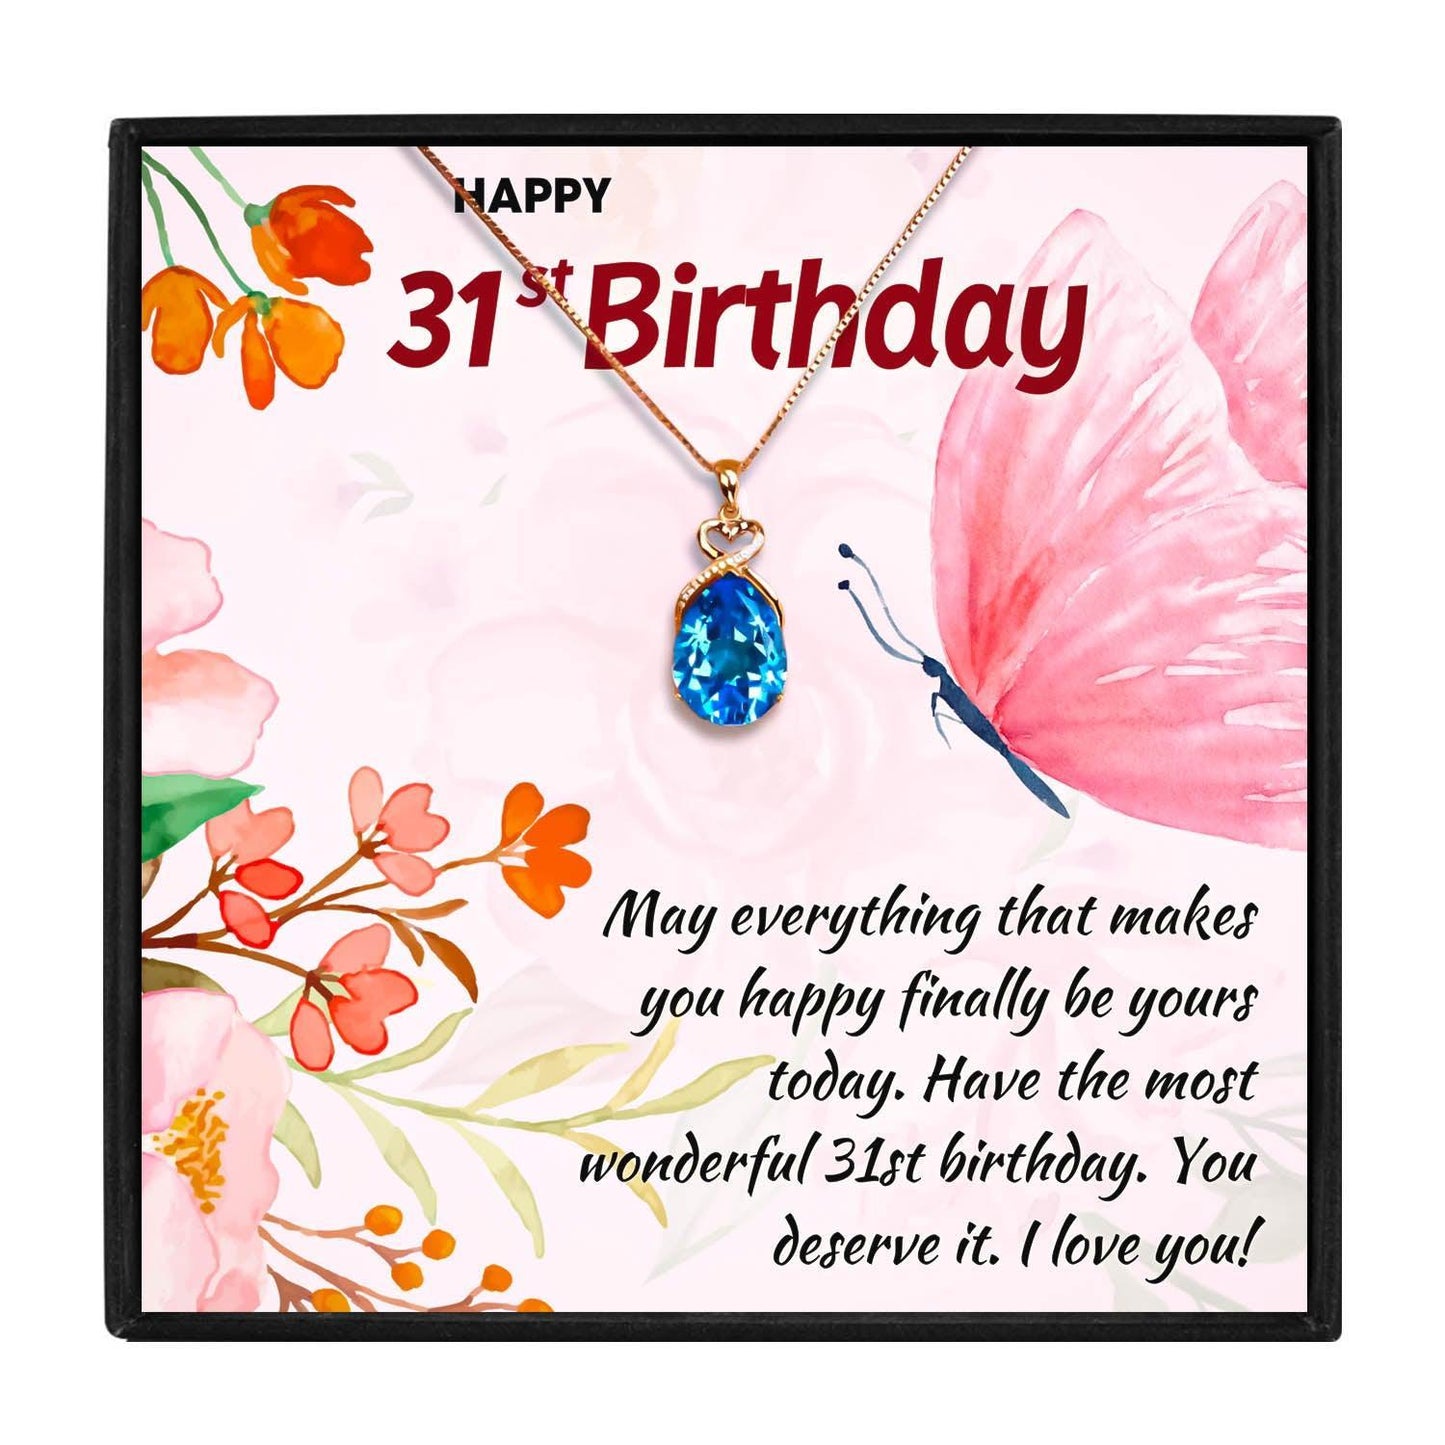 31st Birthday Gifts for 31 Year Old Women in 2023 | 31st Birthday Gifts for 31 Year Old Women - undefined | 31 birthday gift, 31 gifts for 31st birthday, 31st birthday ideas for her, 31st birthday ideas for wife | From Hunny Life | hunnylife.com